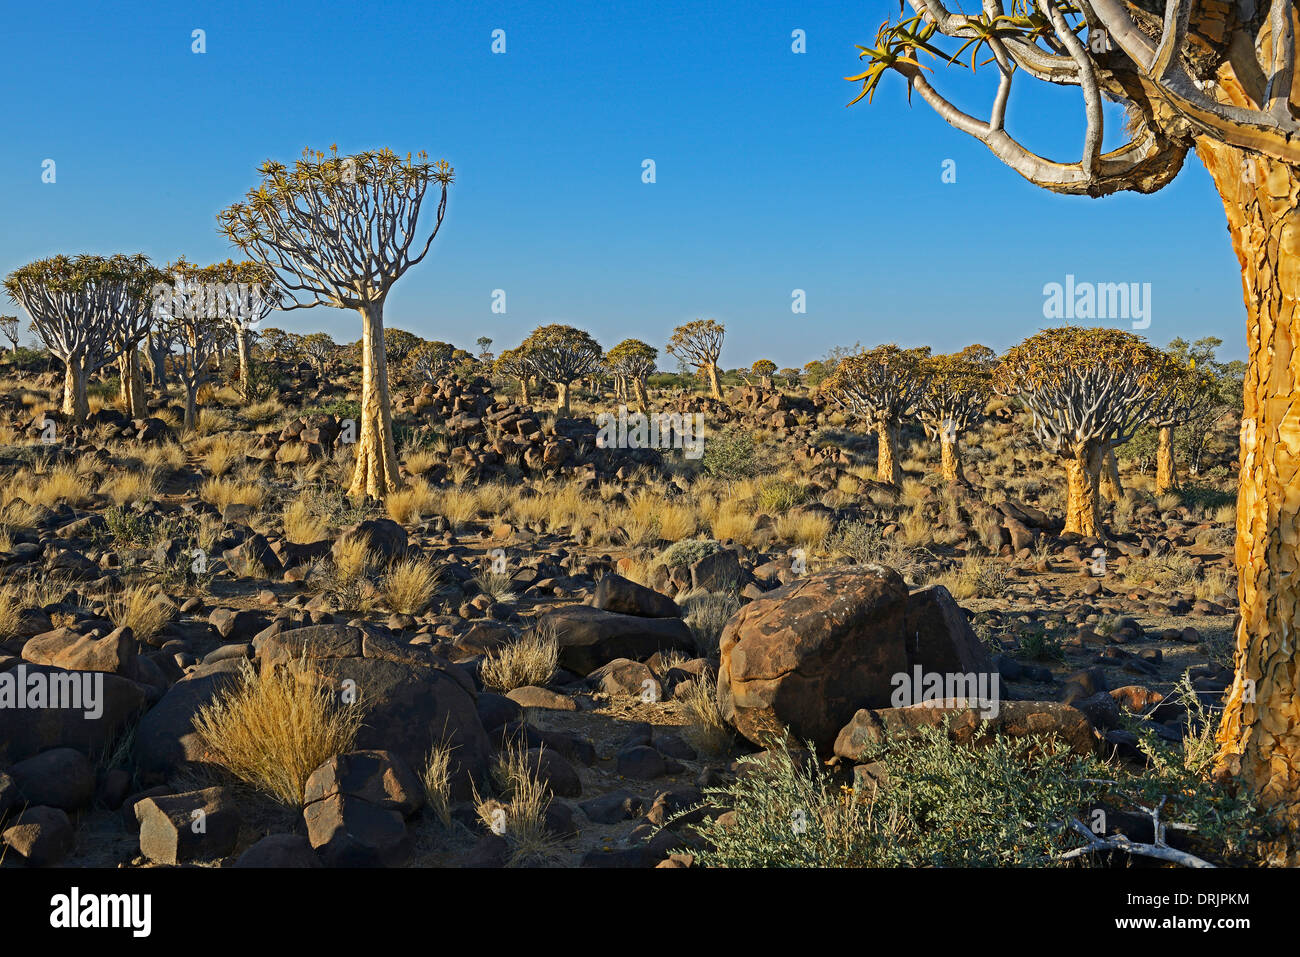 Quiver tree or Quivertree Afrikaans, Kokerboom, aloe dichotoma with sunrise, Keetmanshoop, Namibia, Africa, Koecherbaum oder Qui Stock Photo